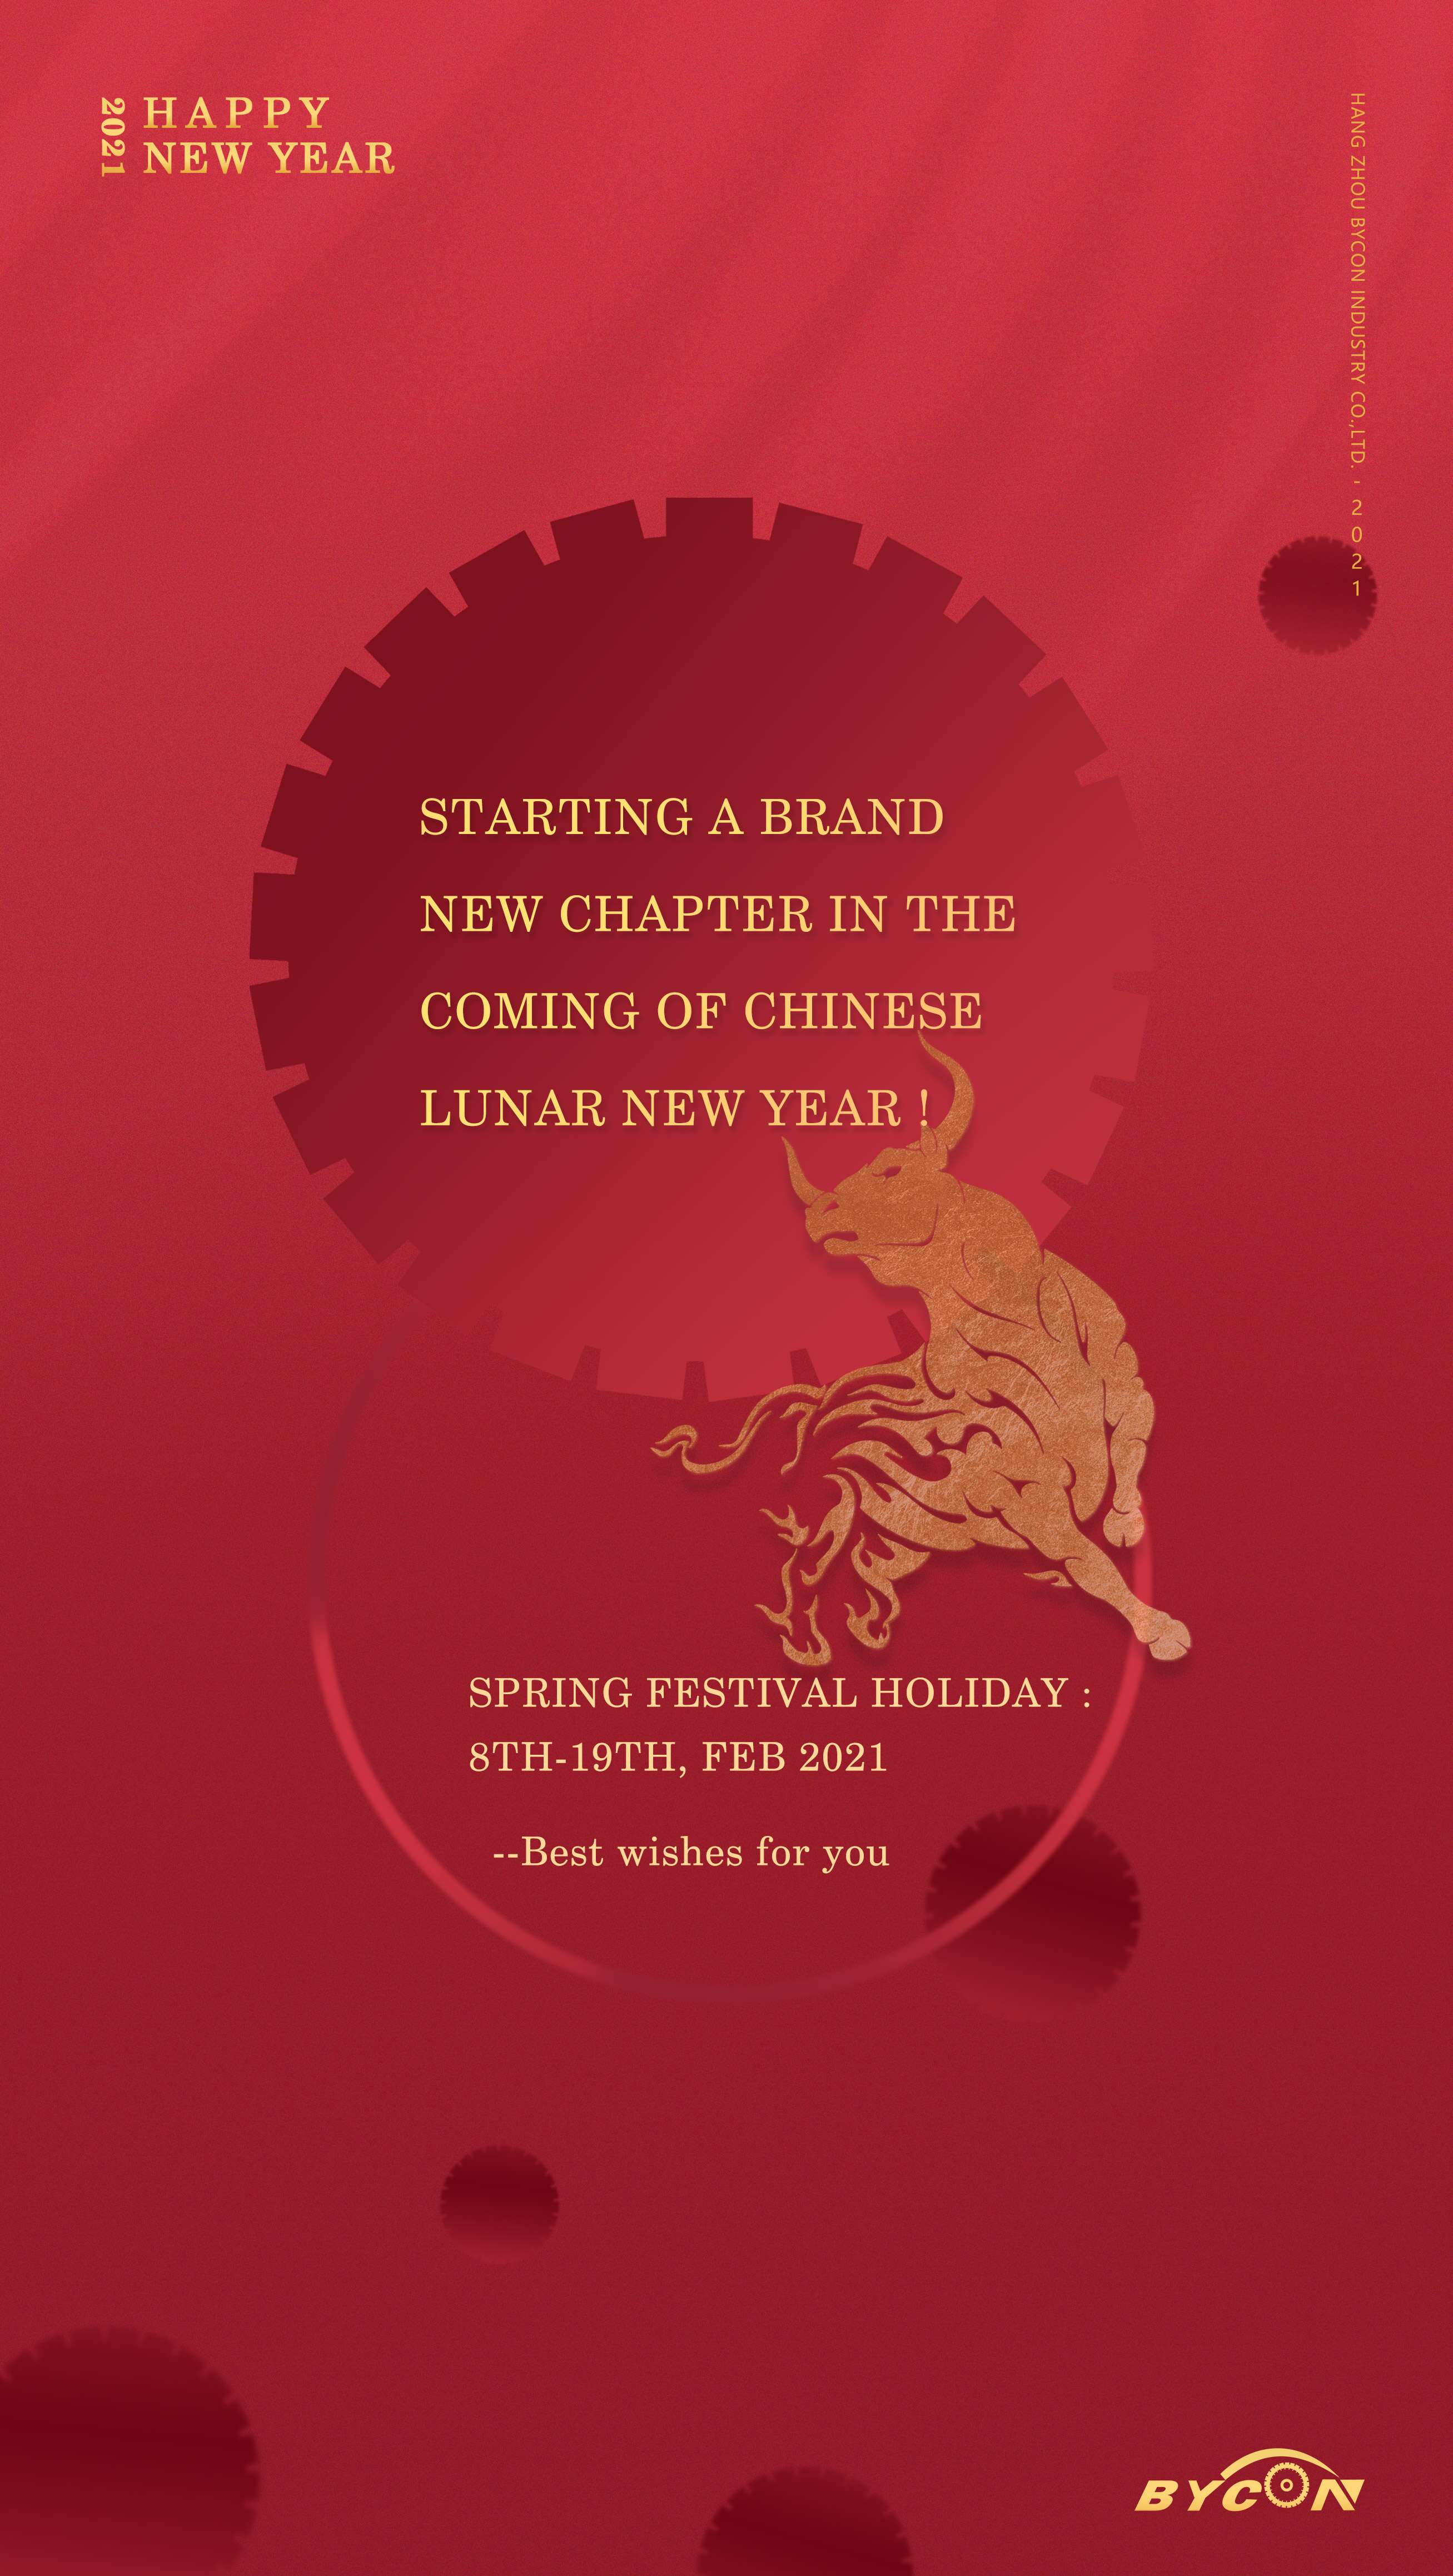 2021 Chinese Spring Festival Holiday